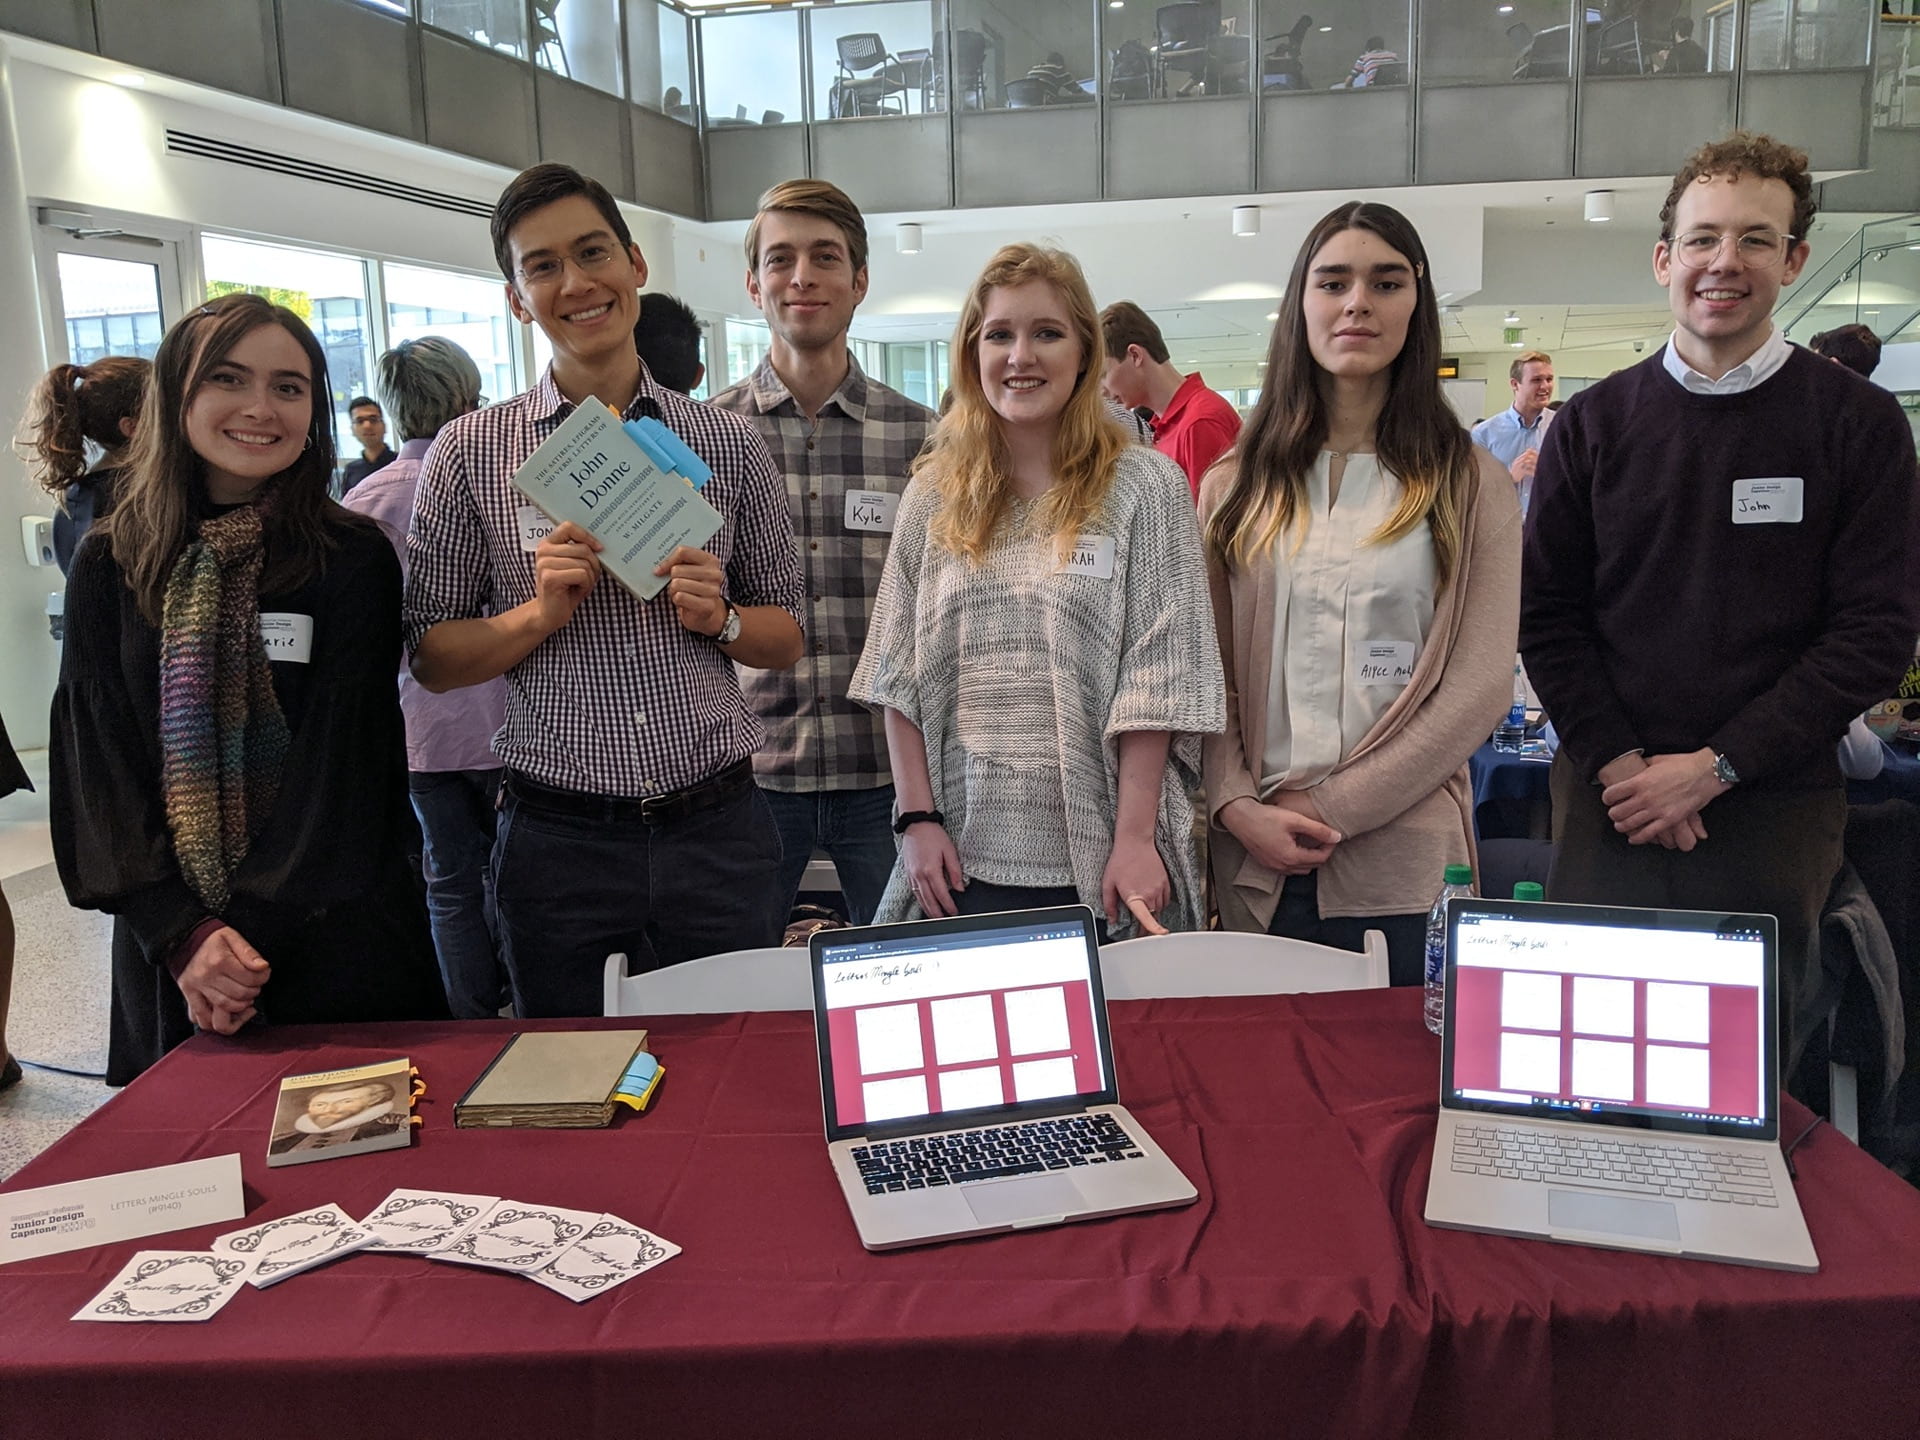 Students standing in front of table with computers ad paper at an academic expo